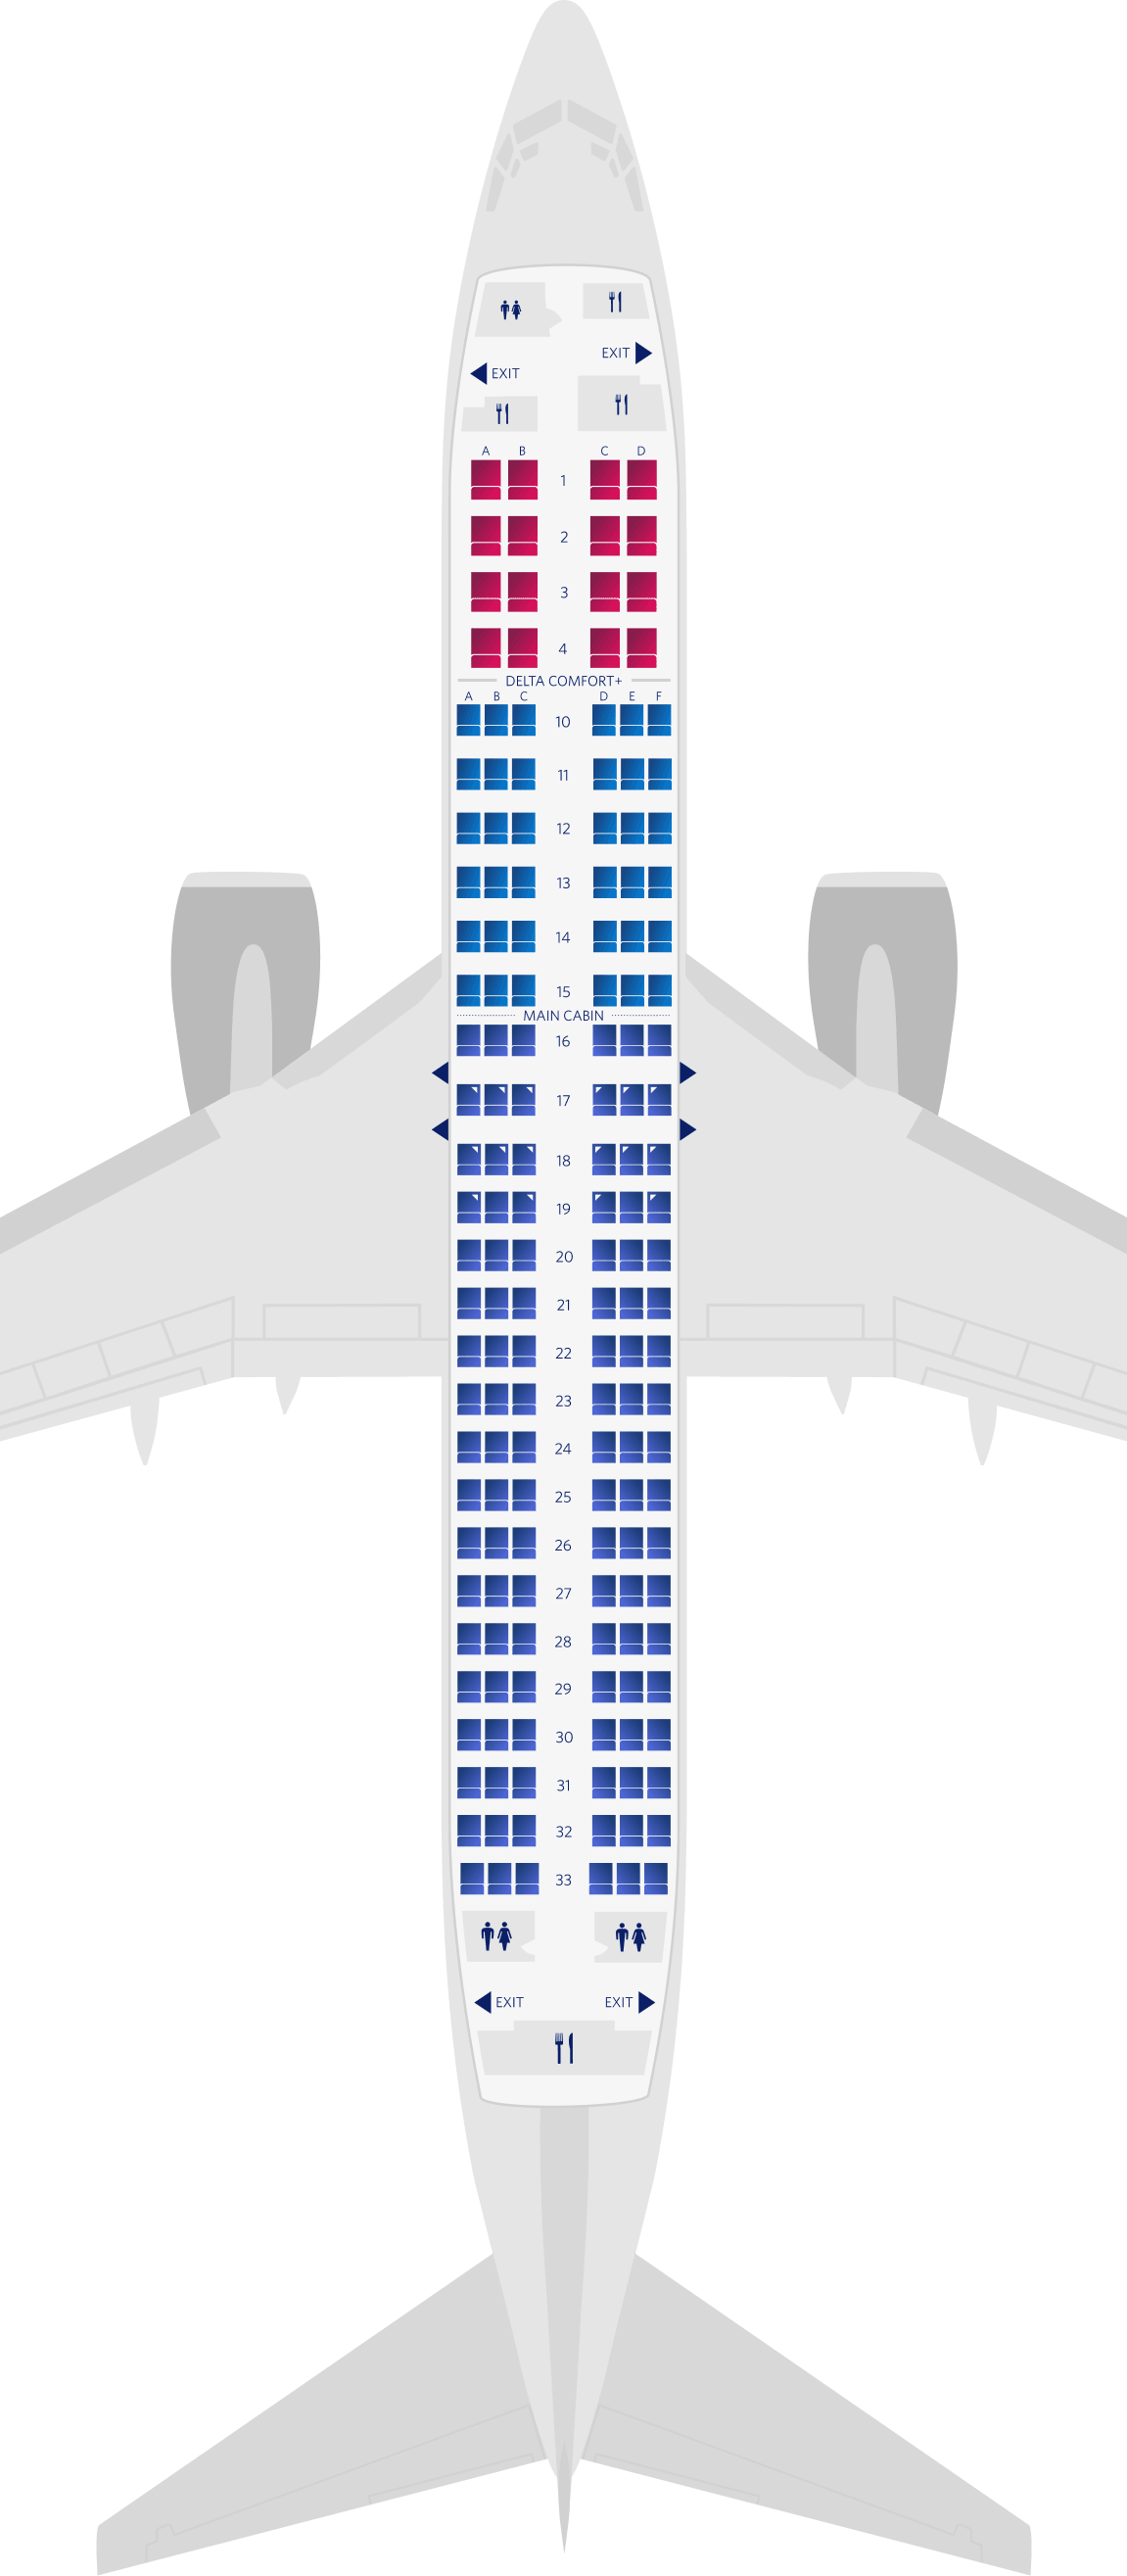 Seat Map For 737 800 Boeing 737-800 Seat Maps, Specs & Amenities | Delta Air Lines